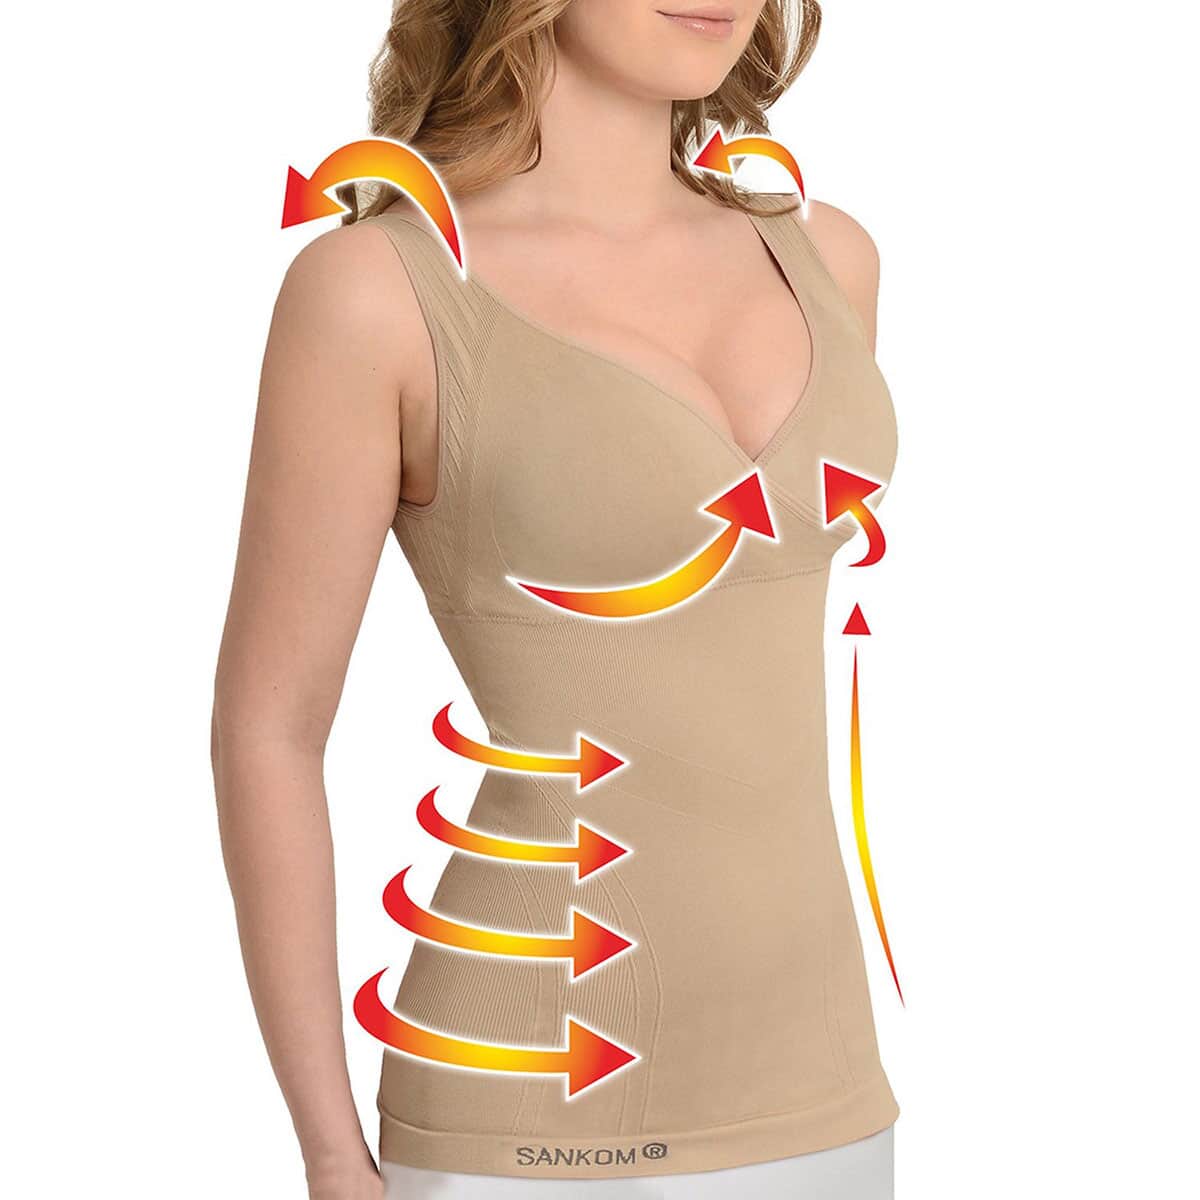 SANKOM Patent Shaping Camisole with Bra with Cooling Fibers - XXXL | Beige image number 2